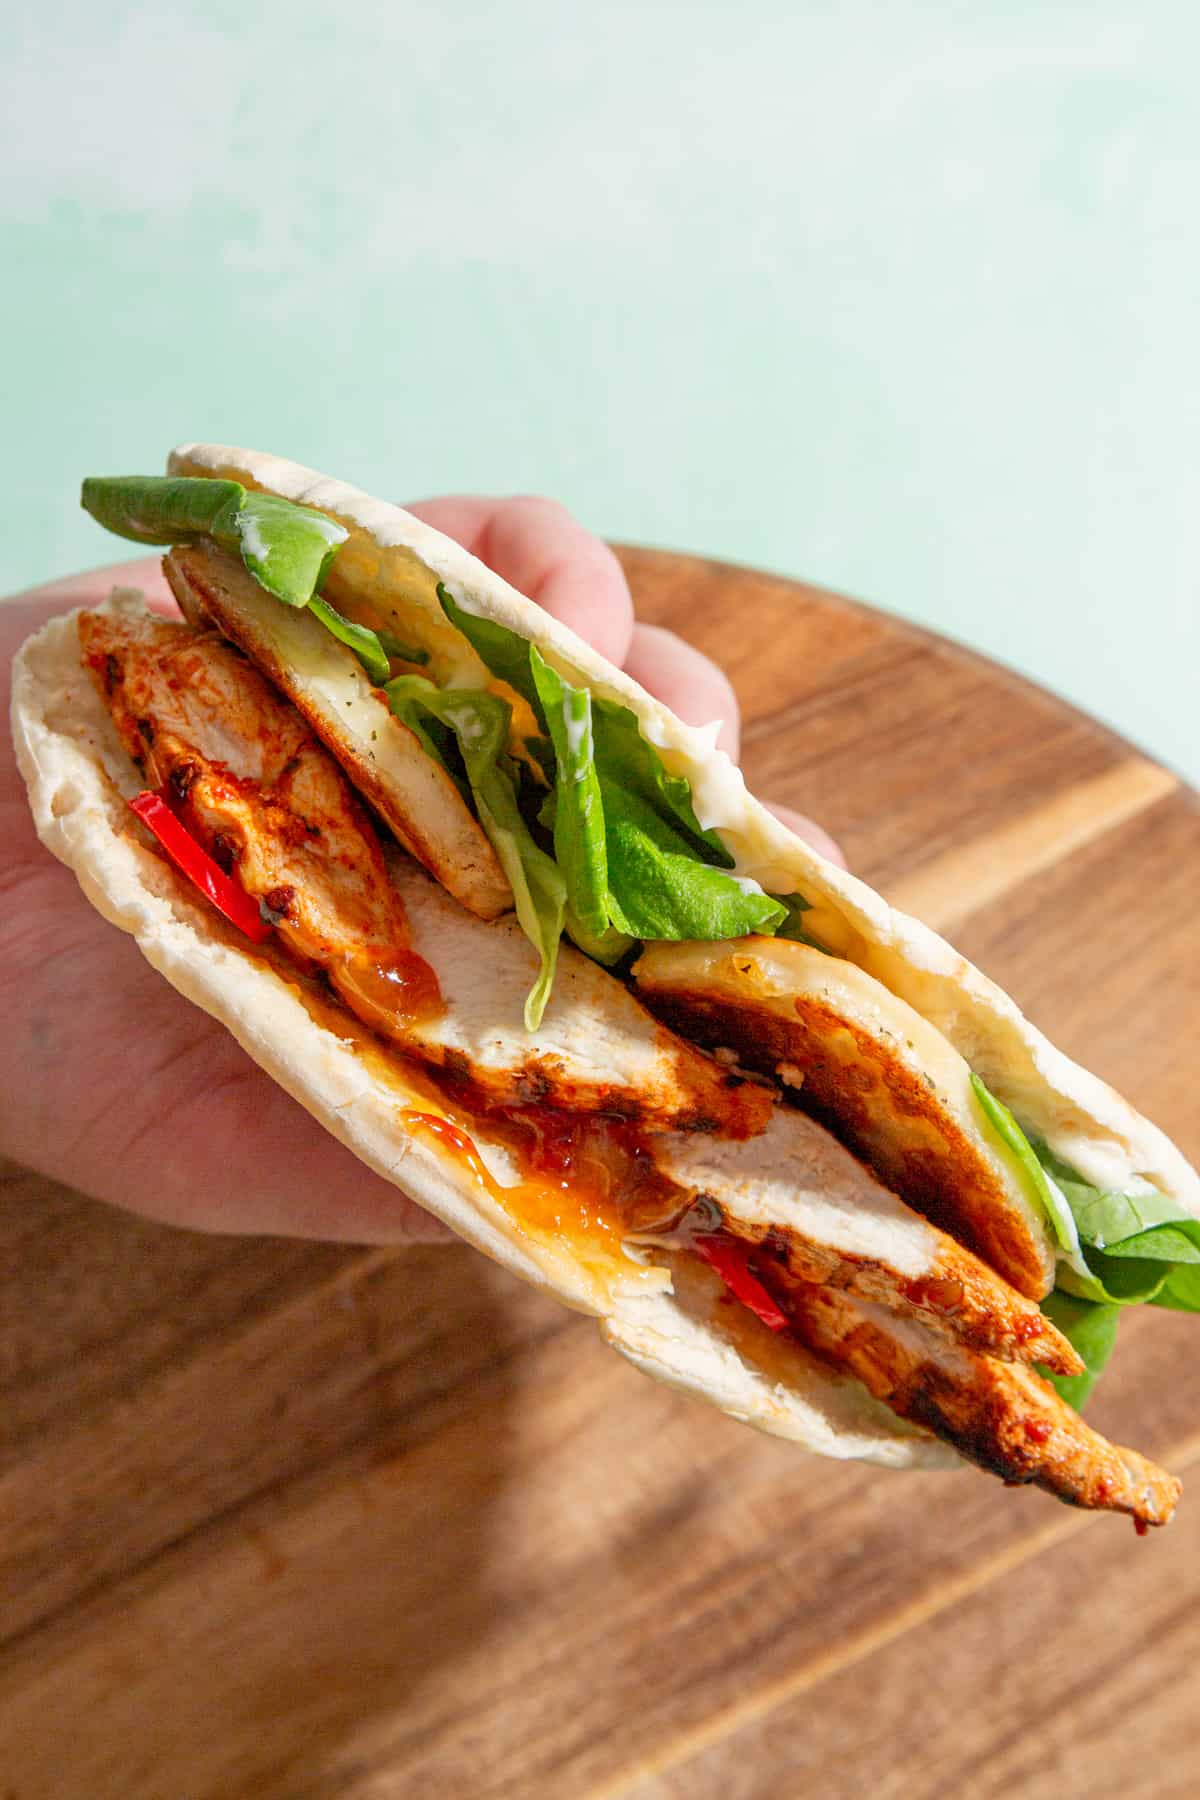 Side view of pitta being held in one hand and filled with browned halloumi, lettuce, chicken, mayo and relish.